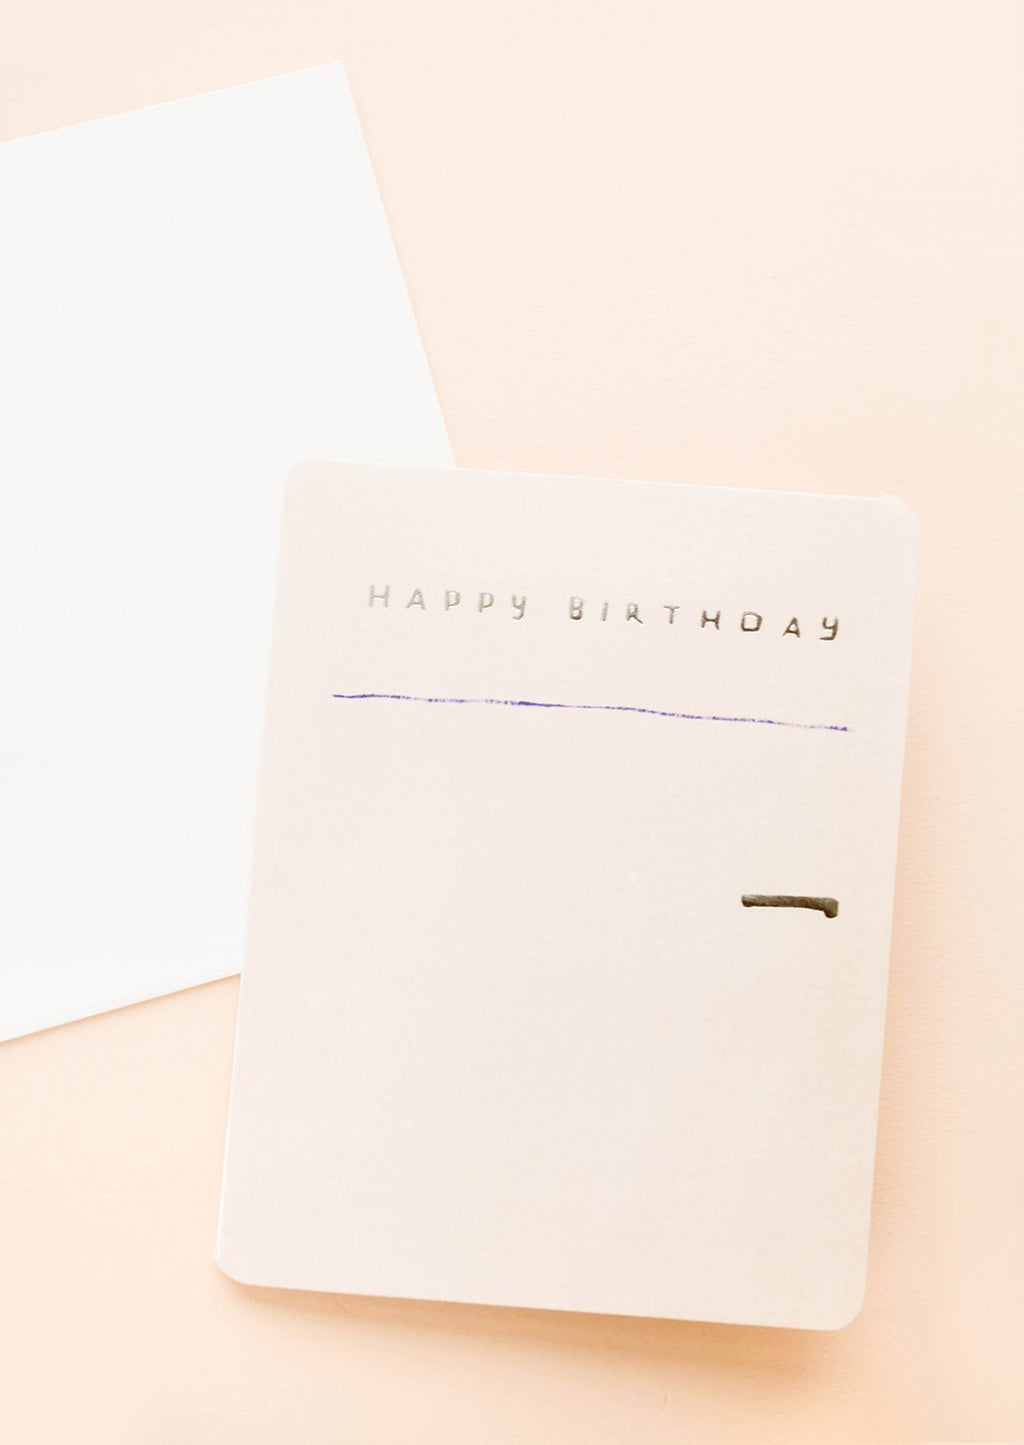 1: Greeting card illustrated to look like the front of a refrigerator, with text "Happy Birthday"